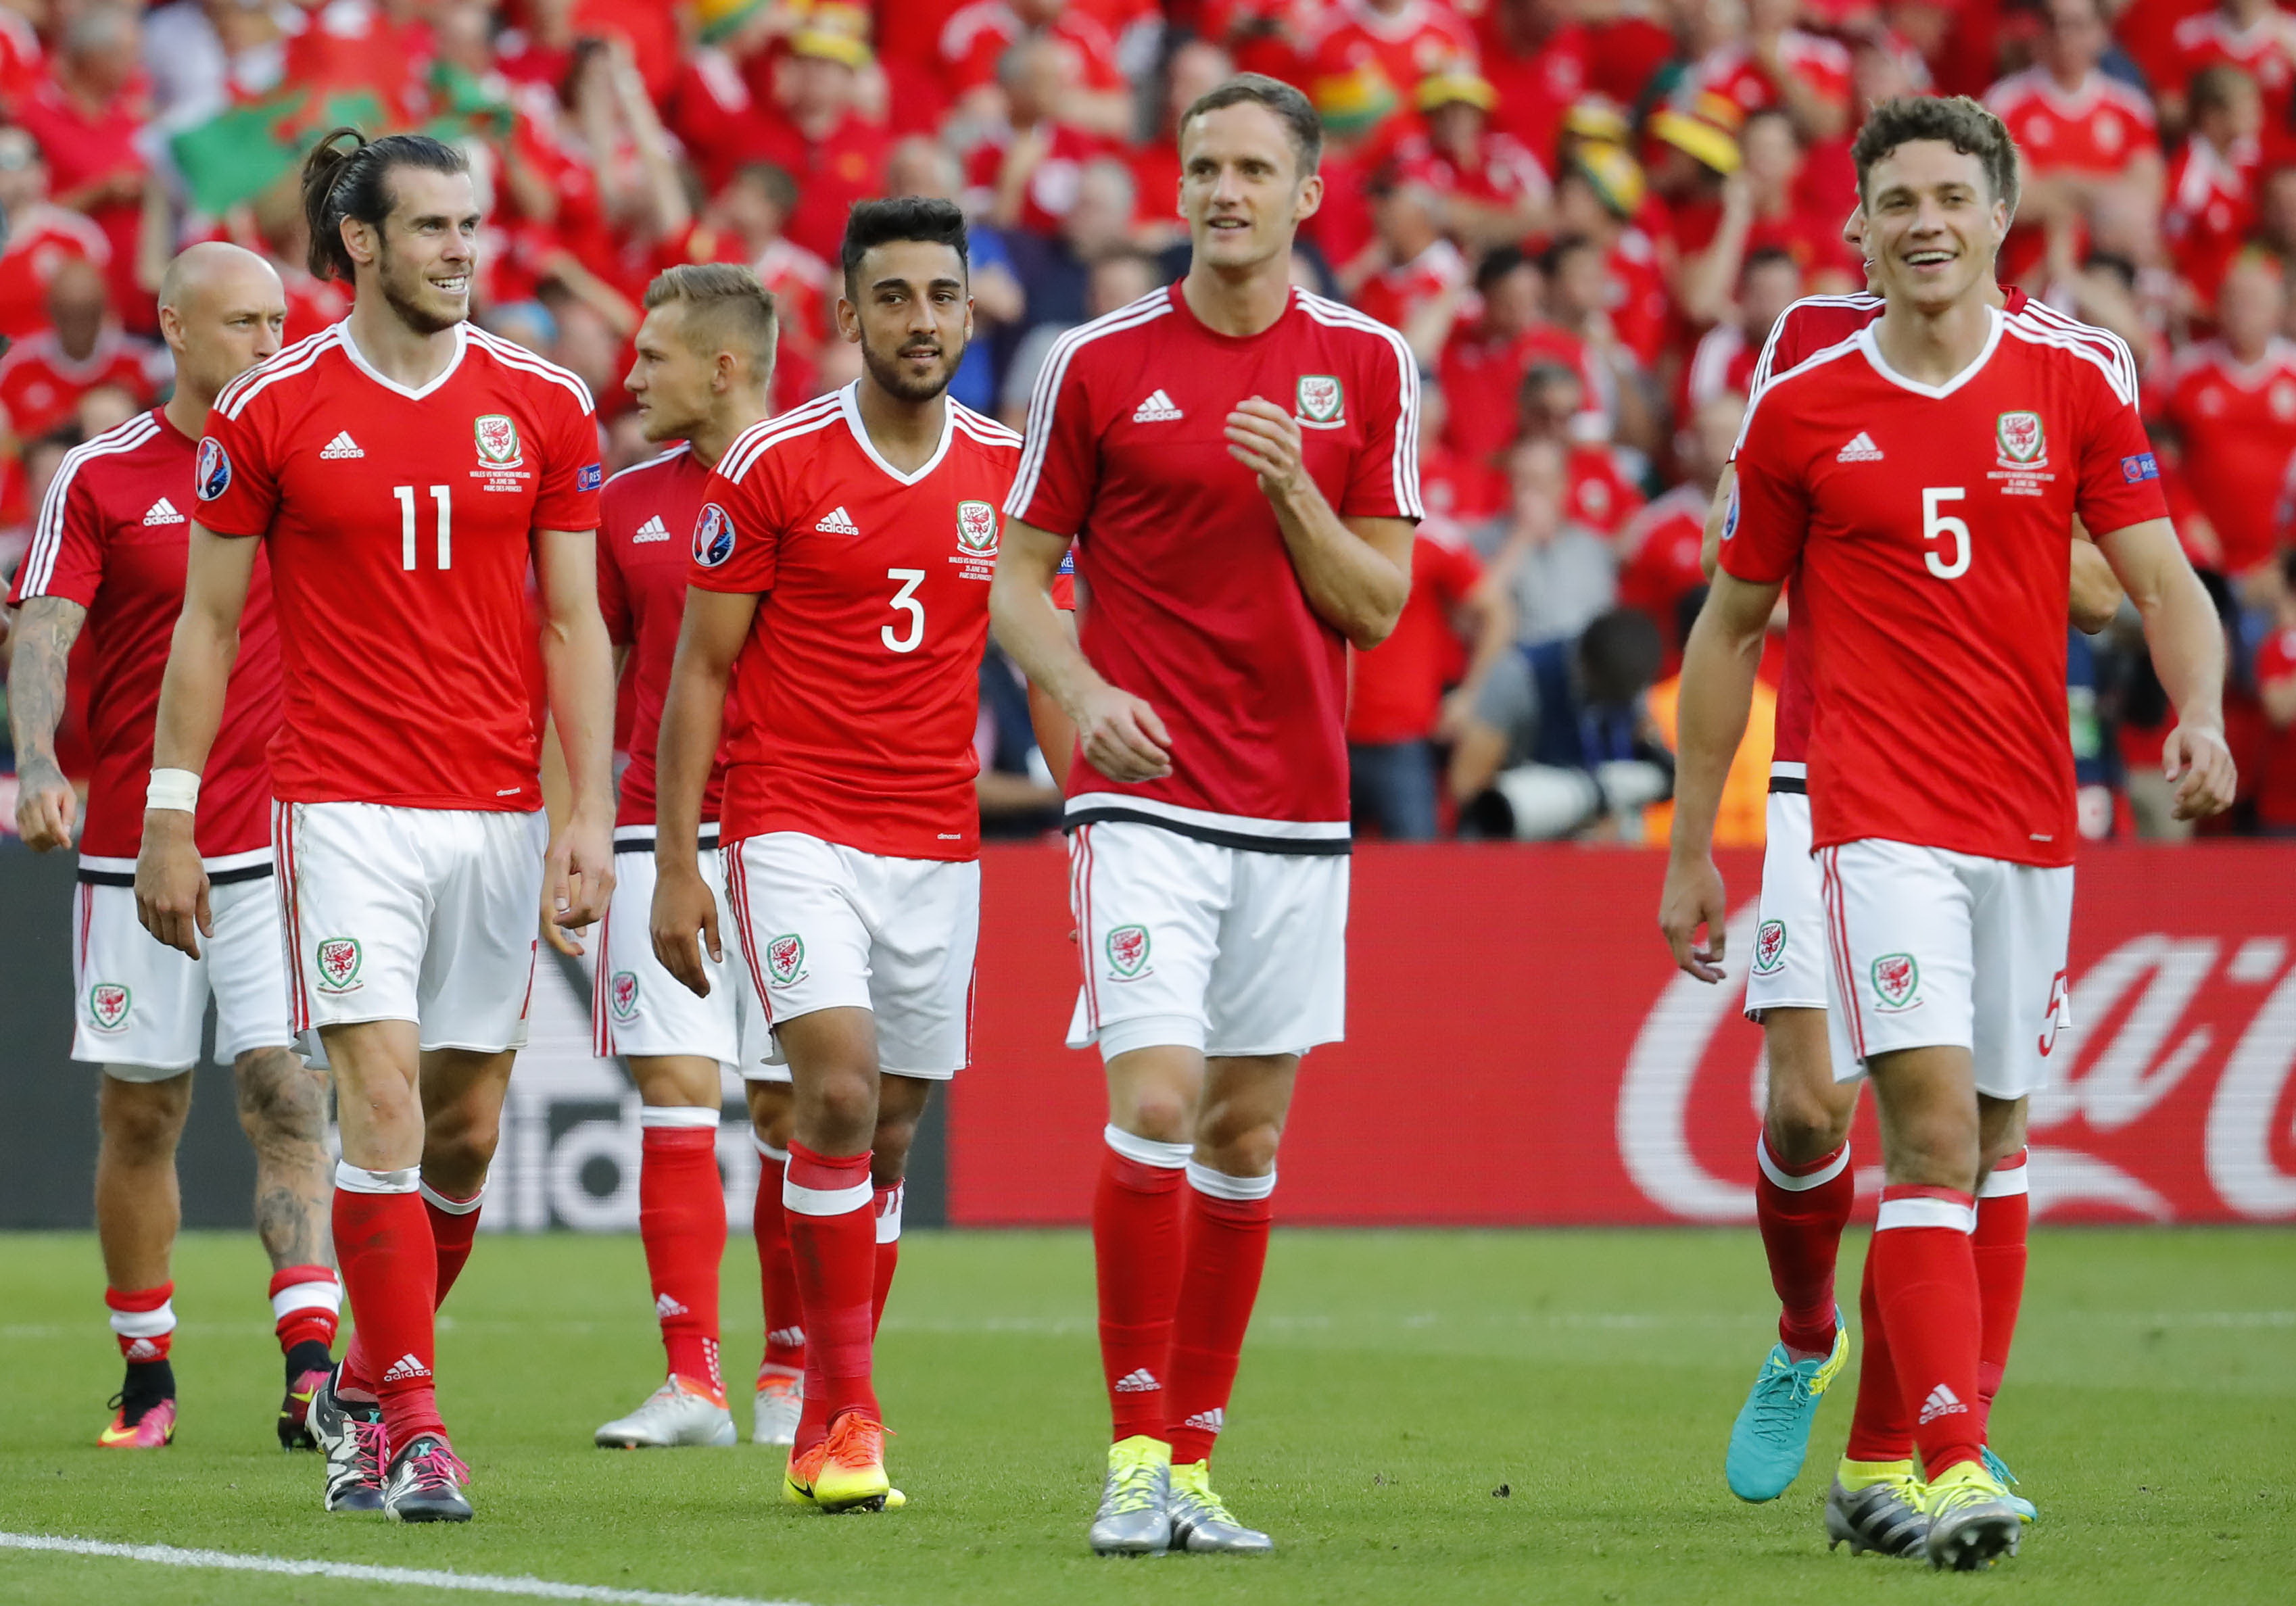 Wales reach last eight as own goal downs Northern Ireland